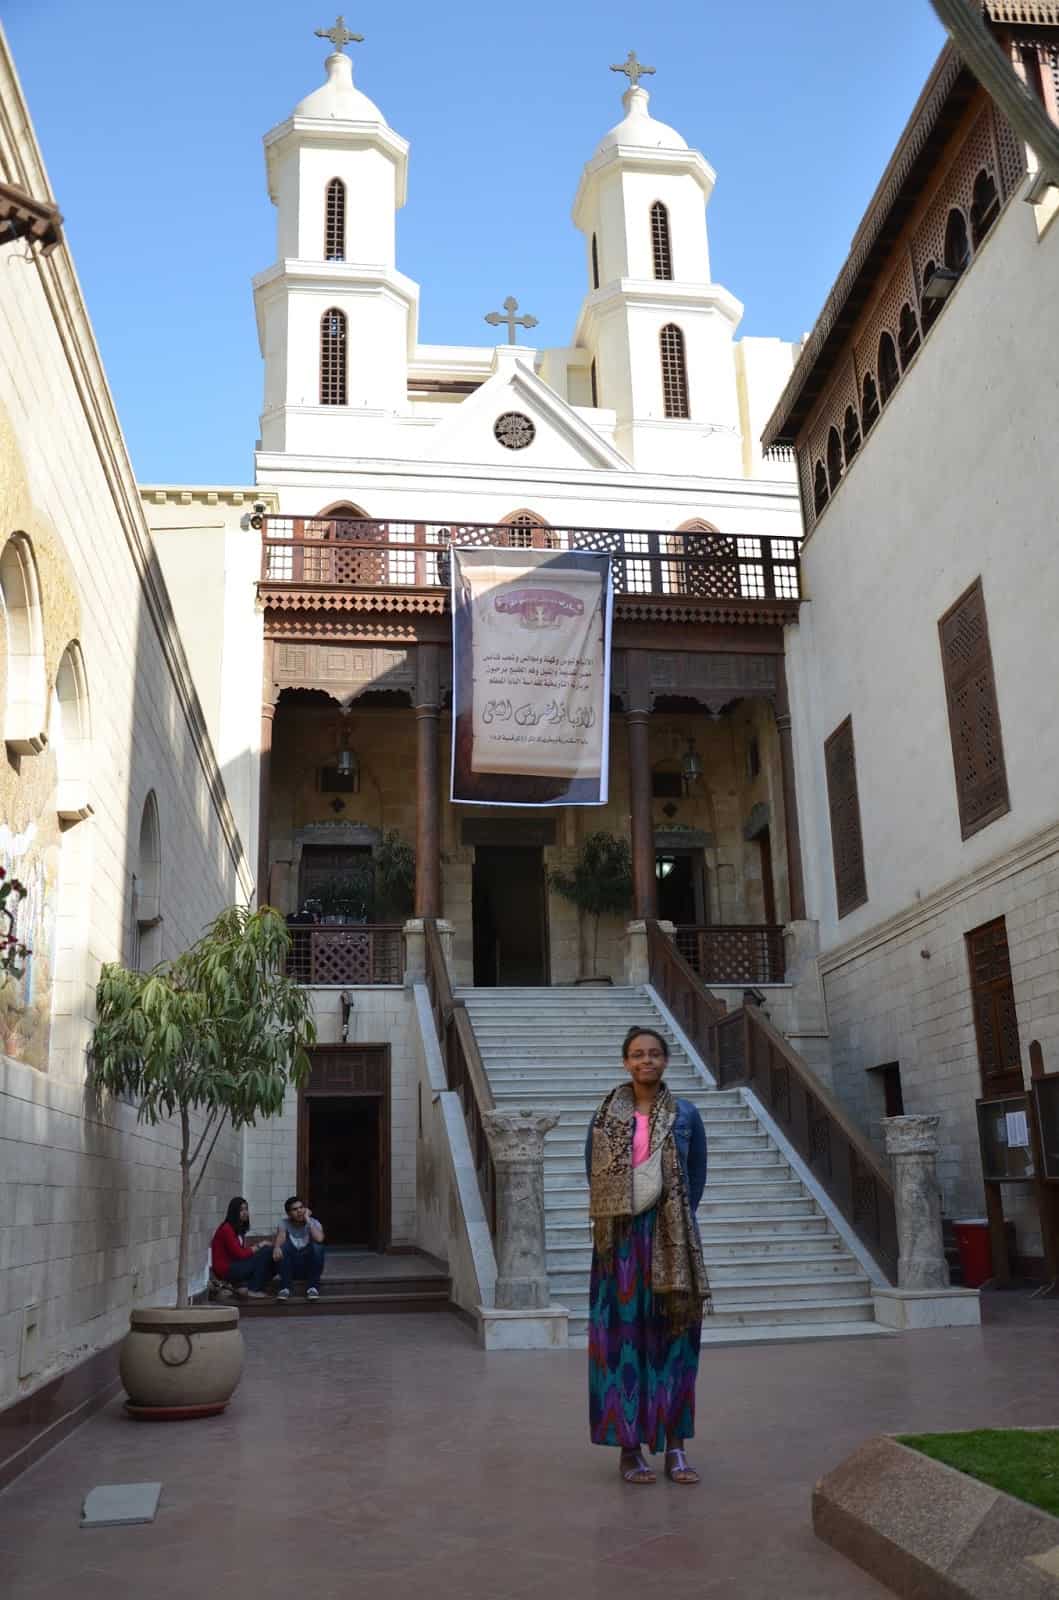 Hanging Church in Cairo, Egypt